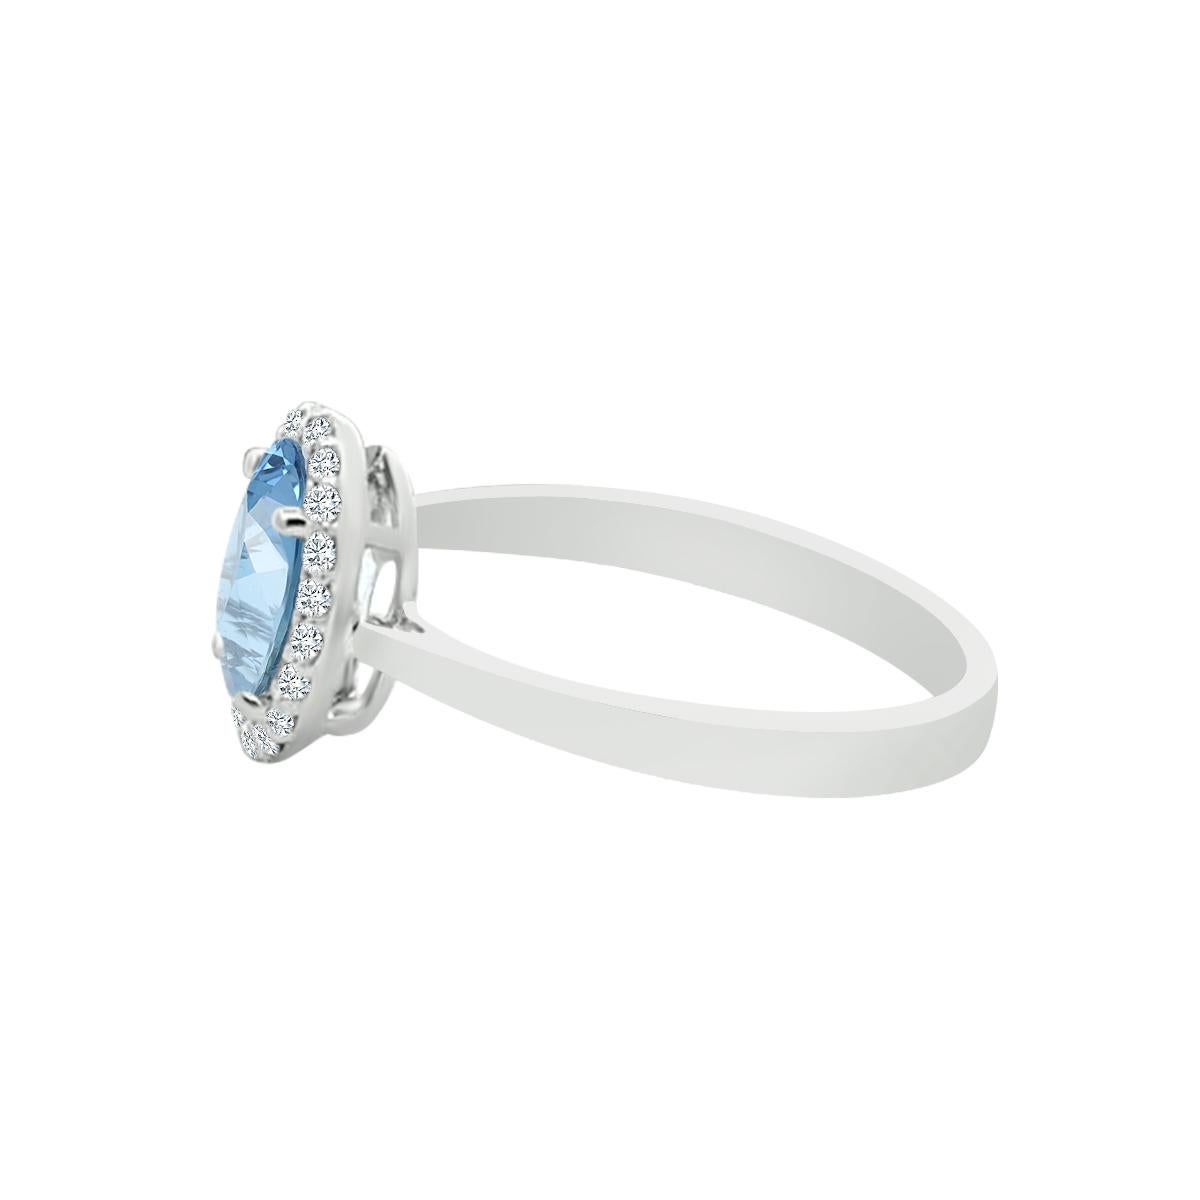 The Light Blue Aquamarine Women's Fashion Ring Will Turn Heads.
The Beautiful Fashion Ring Has One 8x6mm Aquamarine Gemstone In Oval Cut Adorned By Sparkling Diamonds Around It.
This Ring Is Crafted In 14K White Gold And This Beautiful Aqua Ring